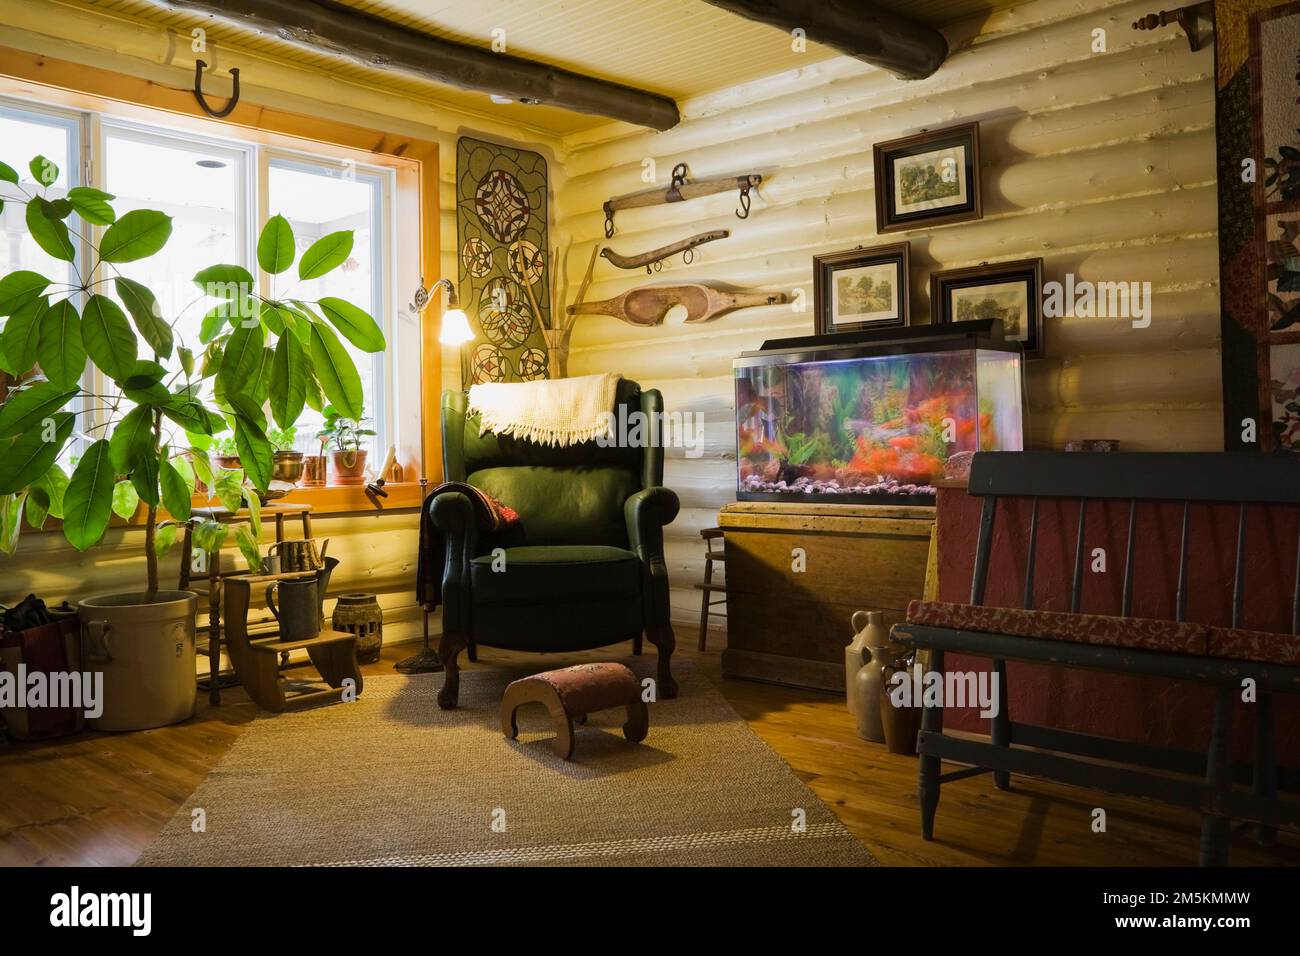 Green leather armchair with small ottoman, long bench and aquarium with goldfish in living room inside country cottage style log home. Stock Photo